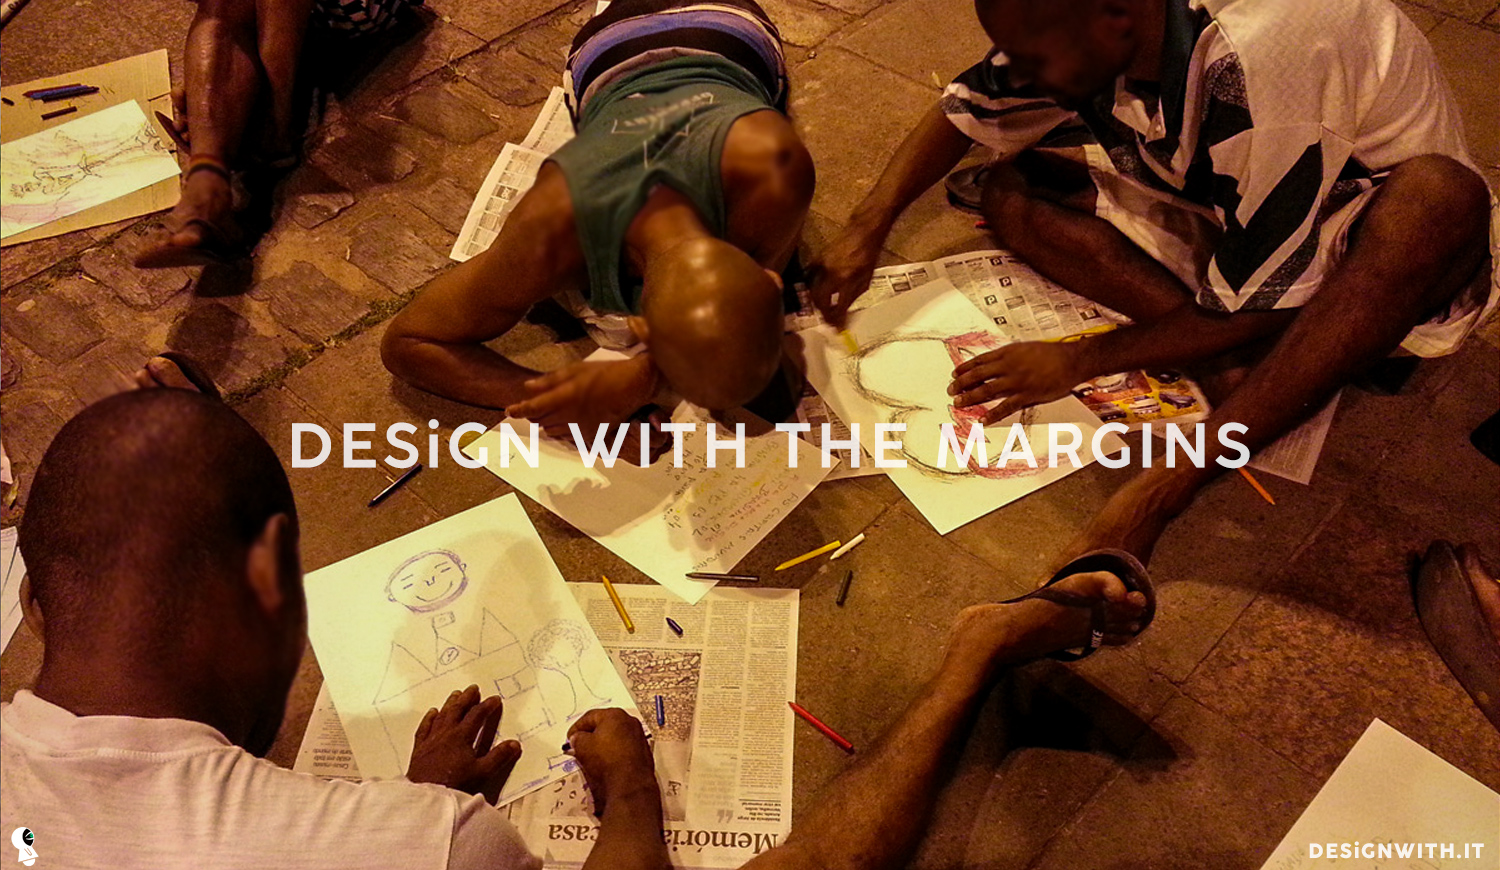 Design with the margins. Design with it!